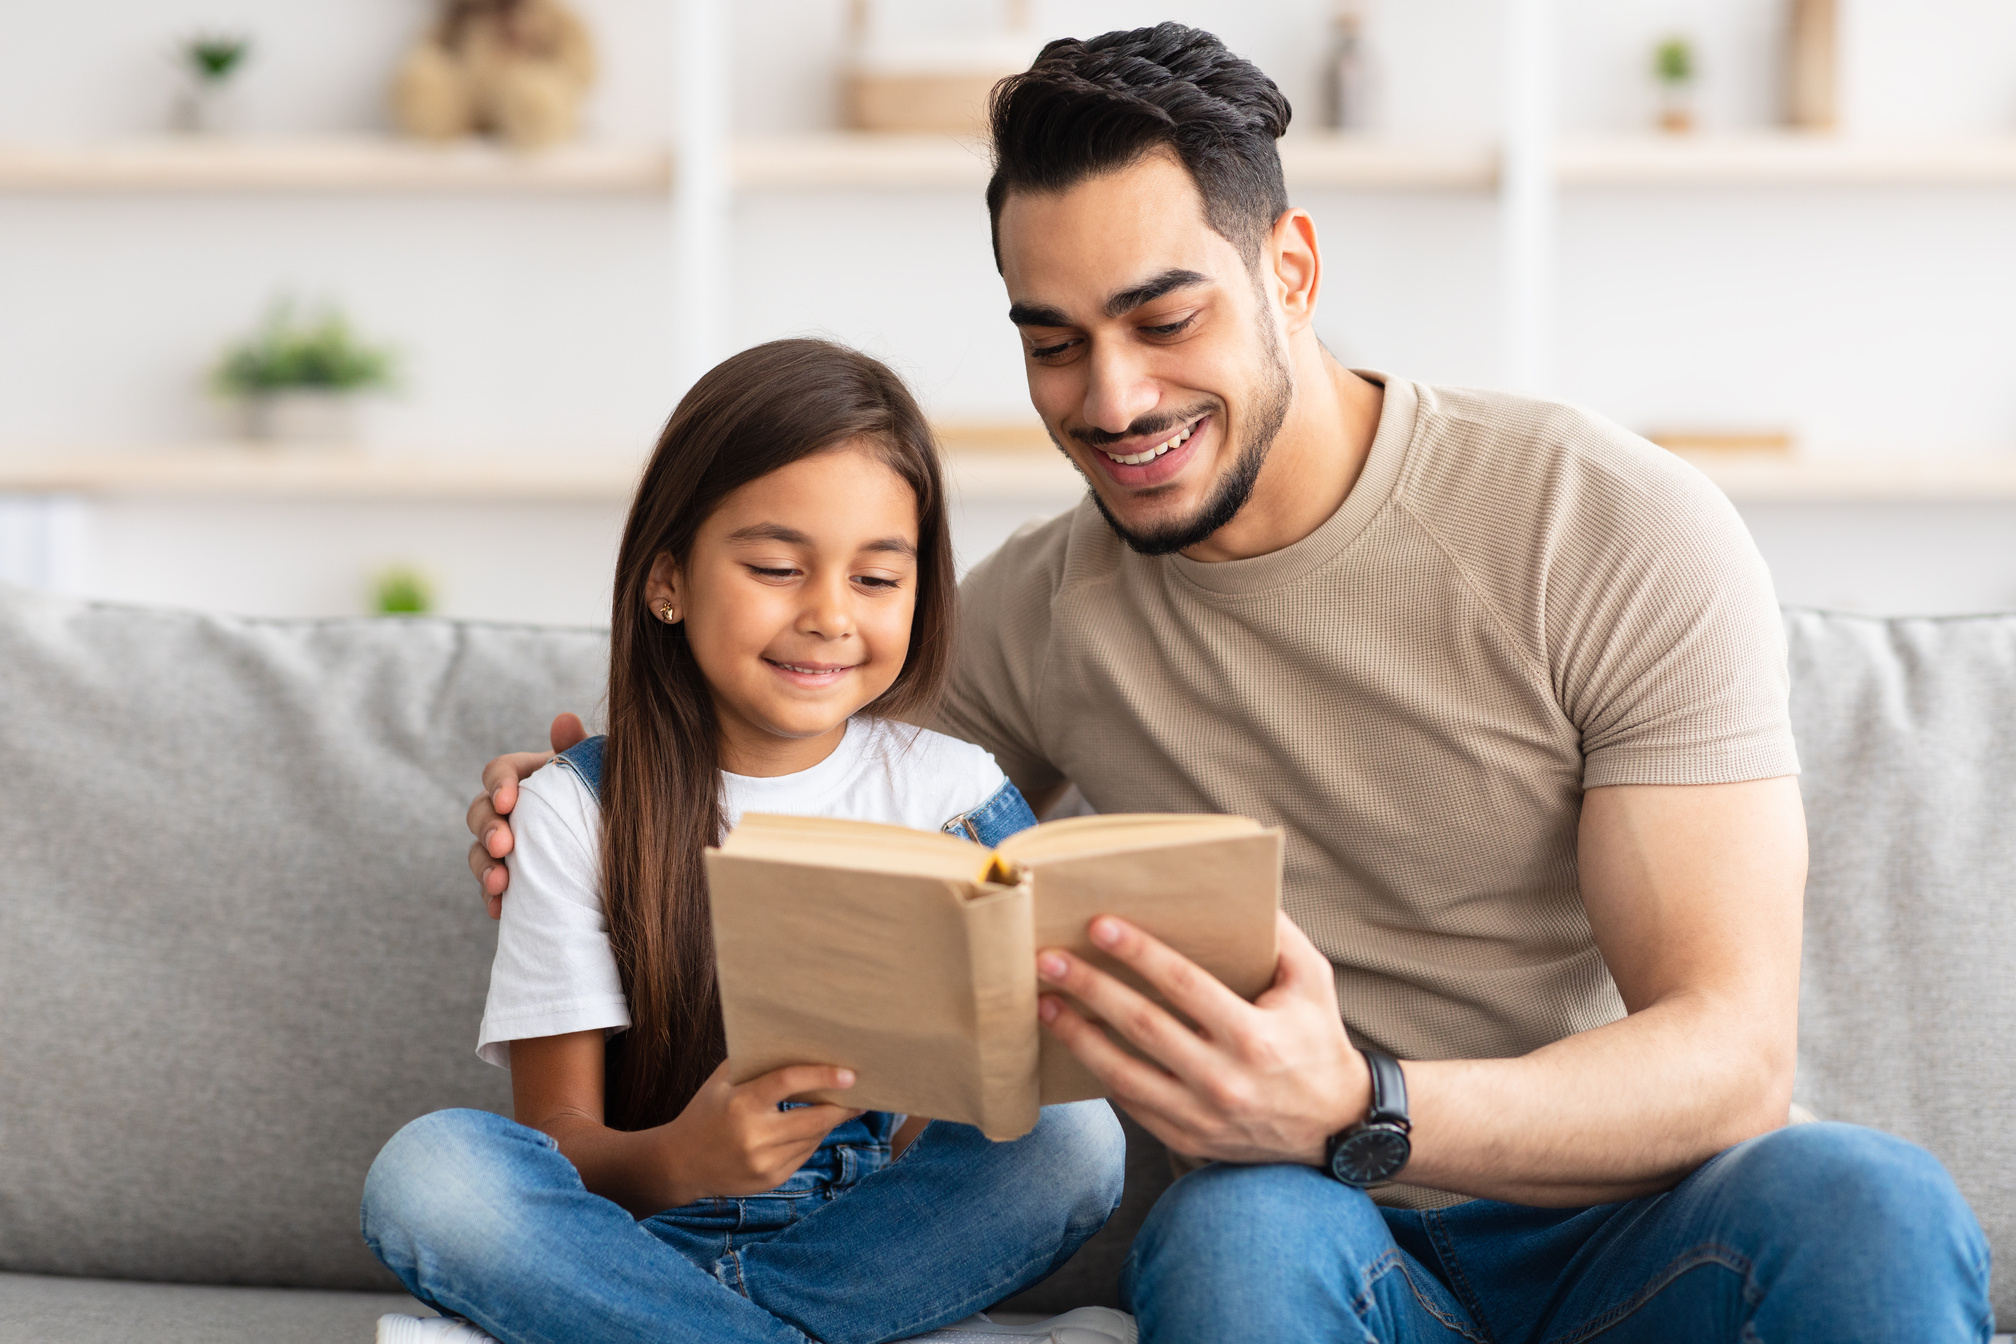 Dad and daughter reading book spending time together at home